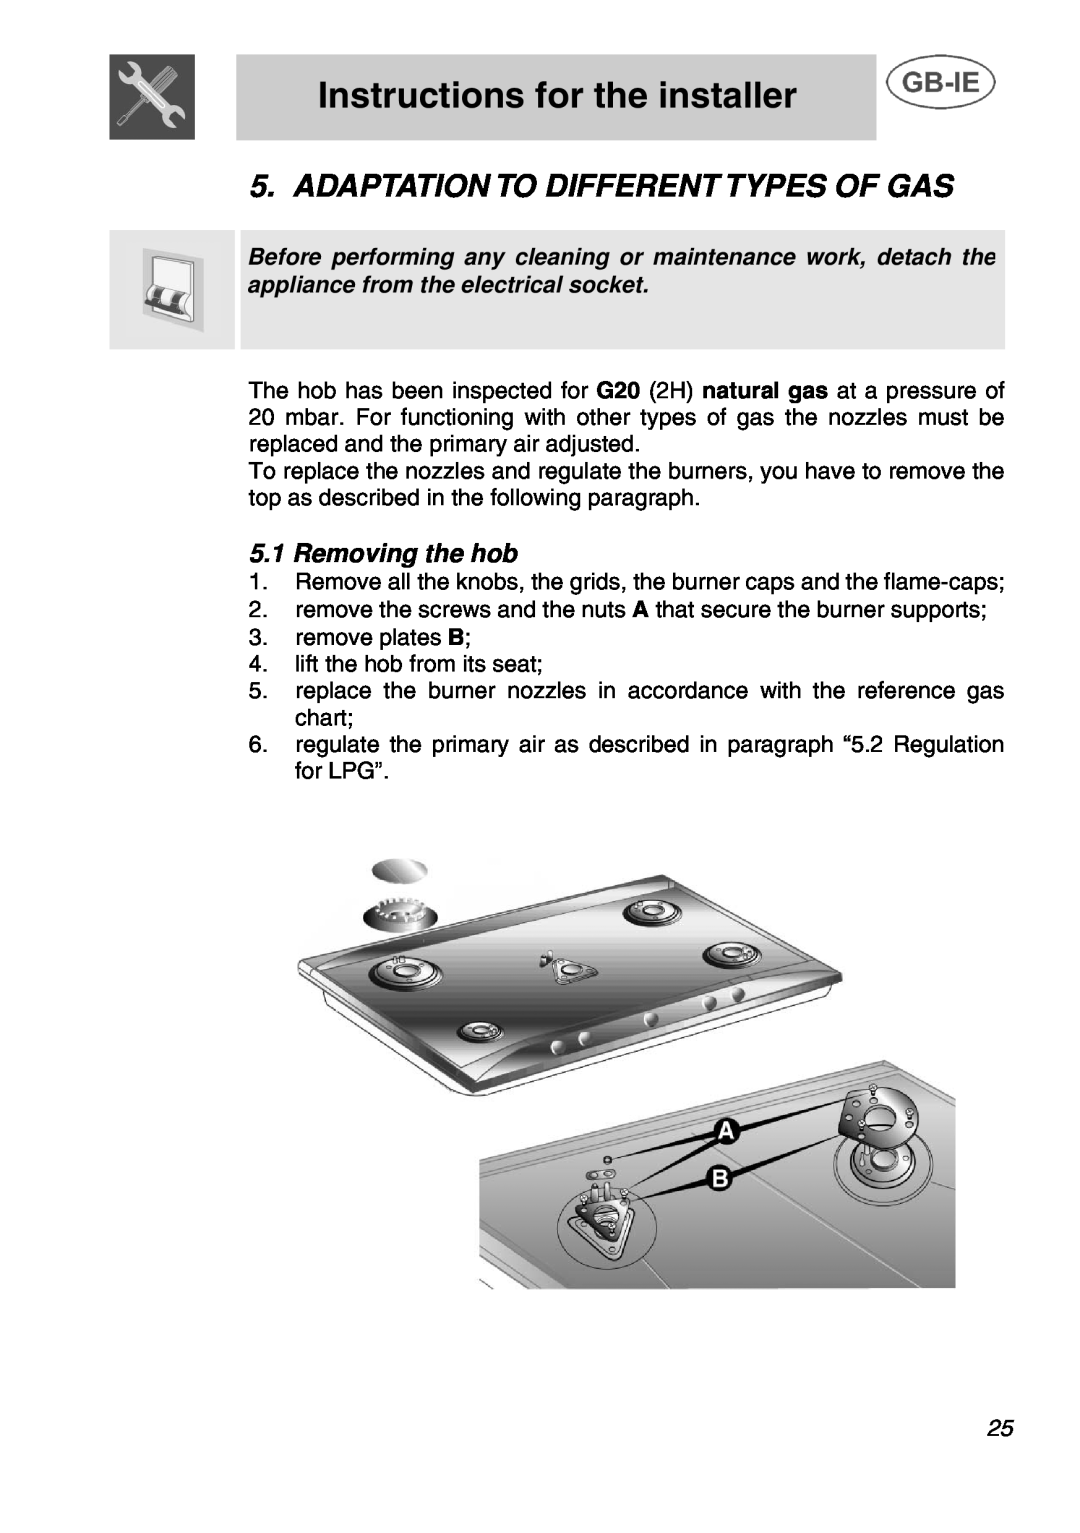 Bosch Appliances NCT 685 N manual Adaptation To Different Types Of Gas, Removing the hob, Instructions for the installer 